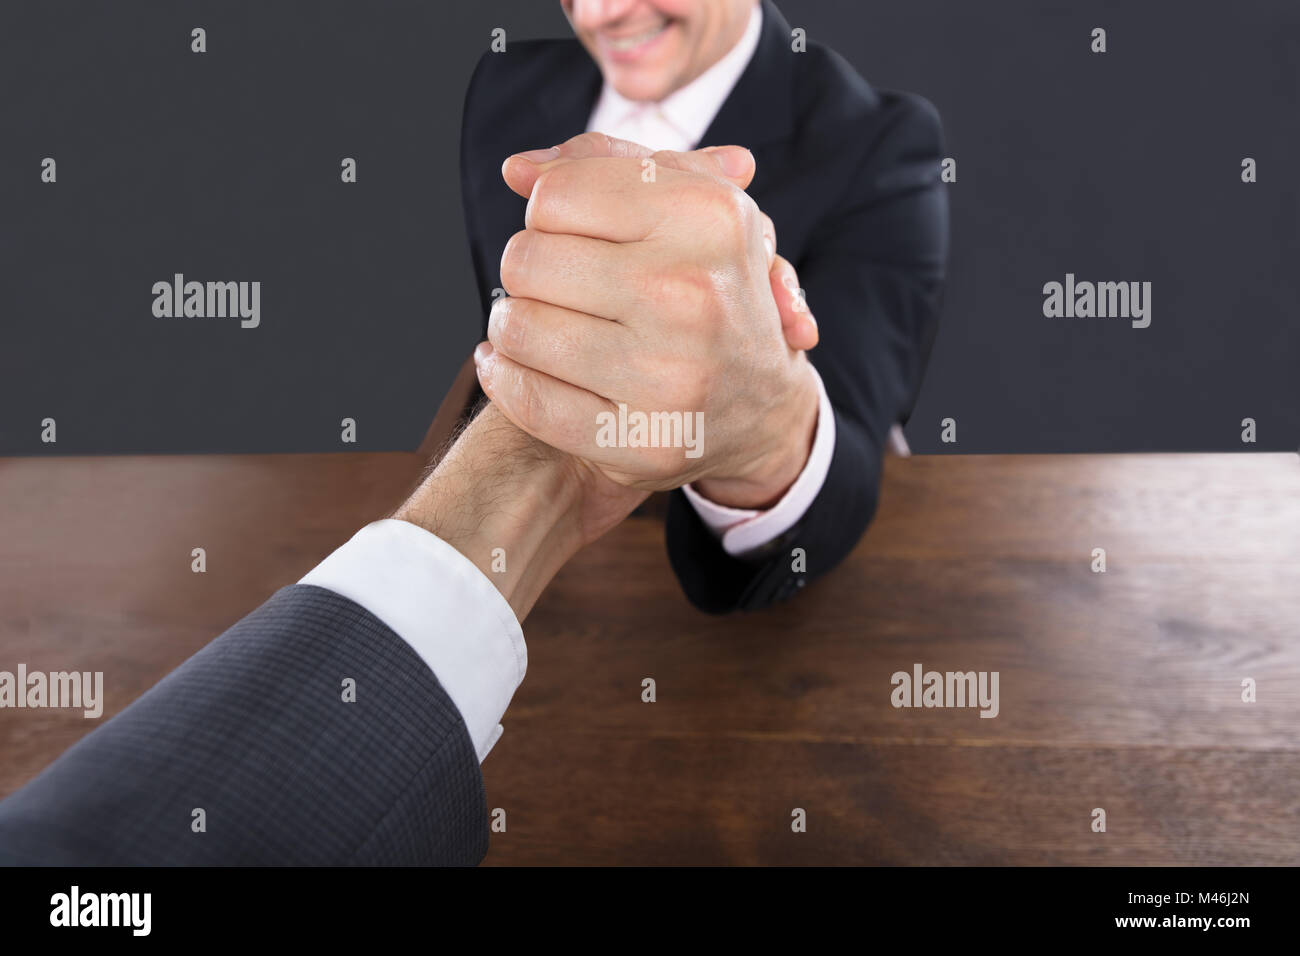 Close-up Of A Two Businessman Competing In Arm Wrestling On Wooden Desk Stock Photo